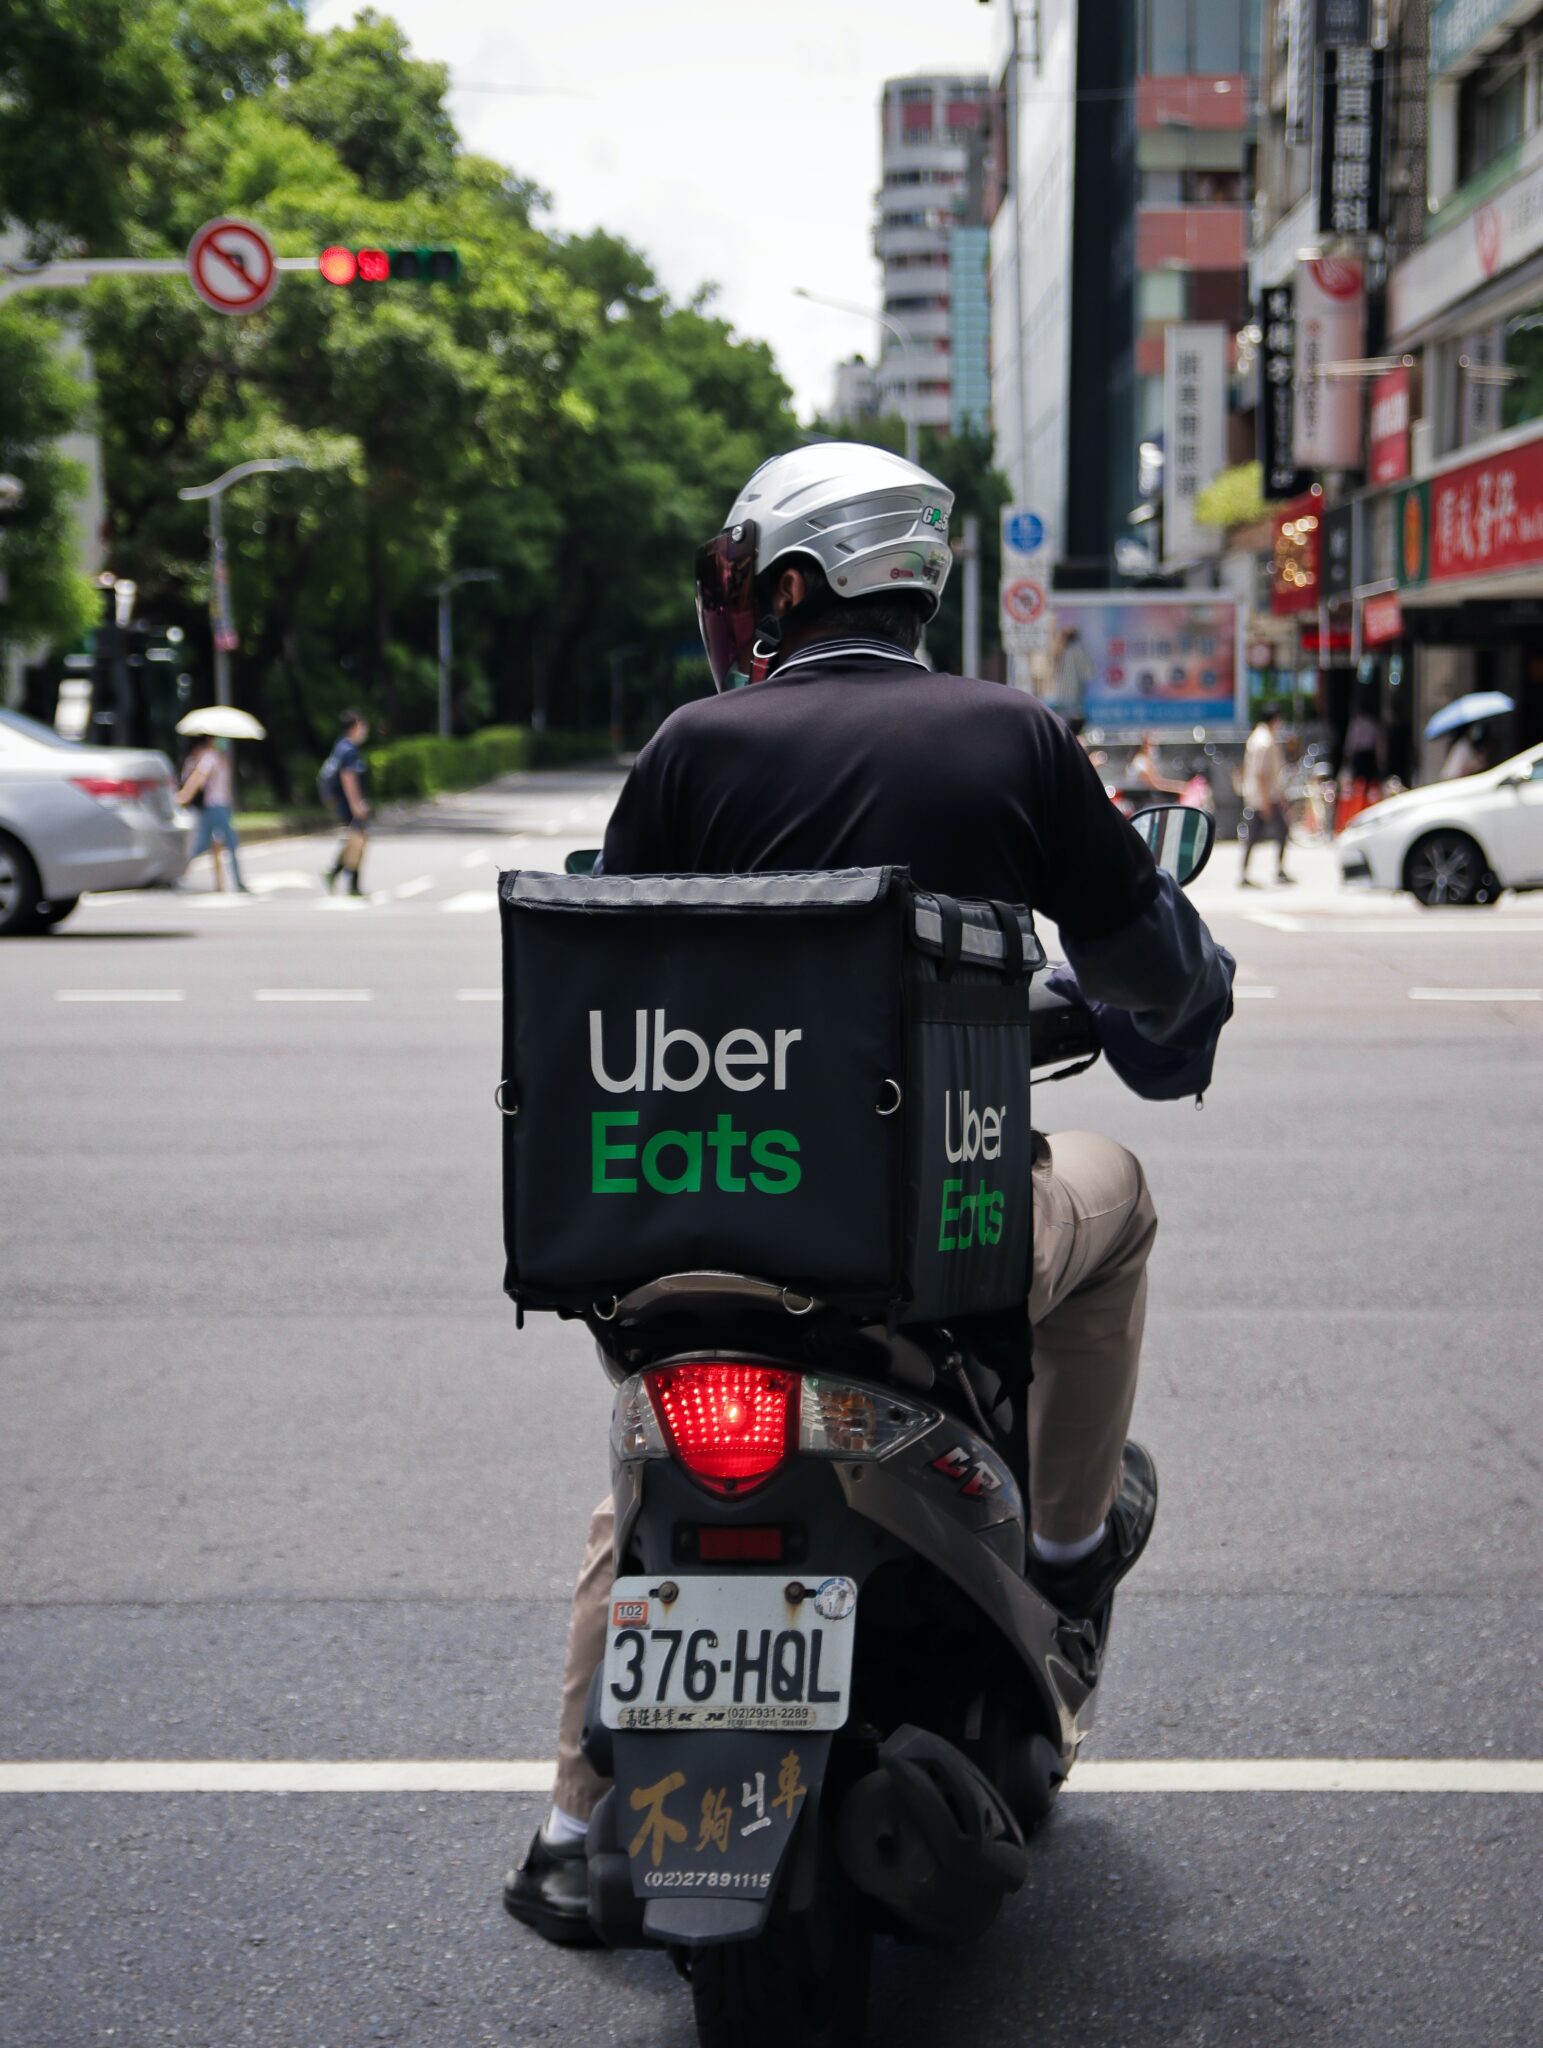 back of moped with Uber Eats carrier box